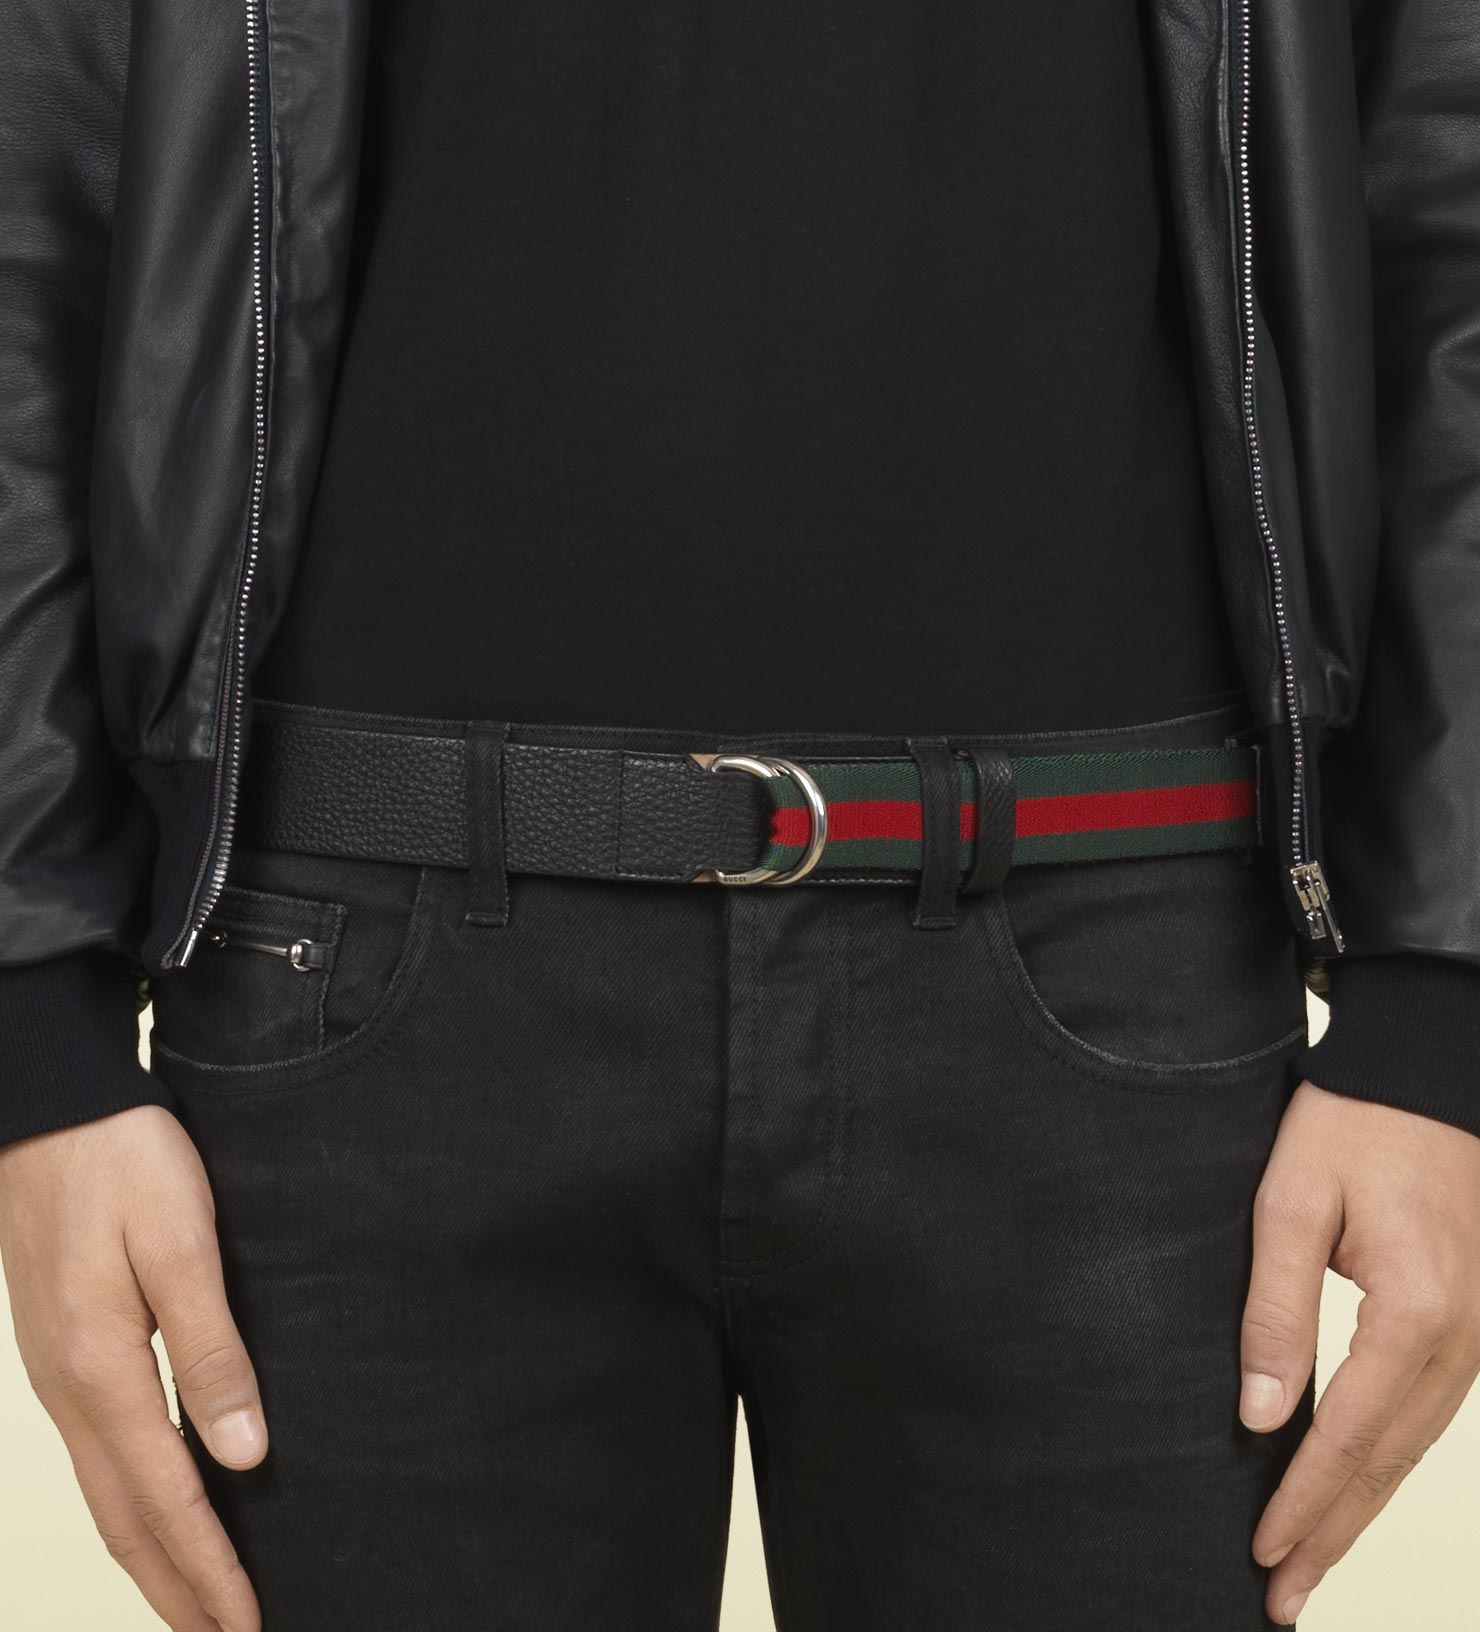 Gucci Black Leather Belt with Dring Buckle and Signature Web for Men - Lyst